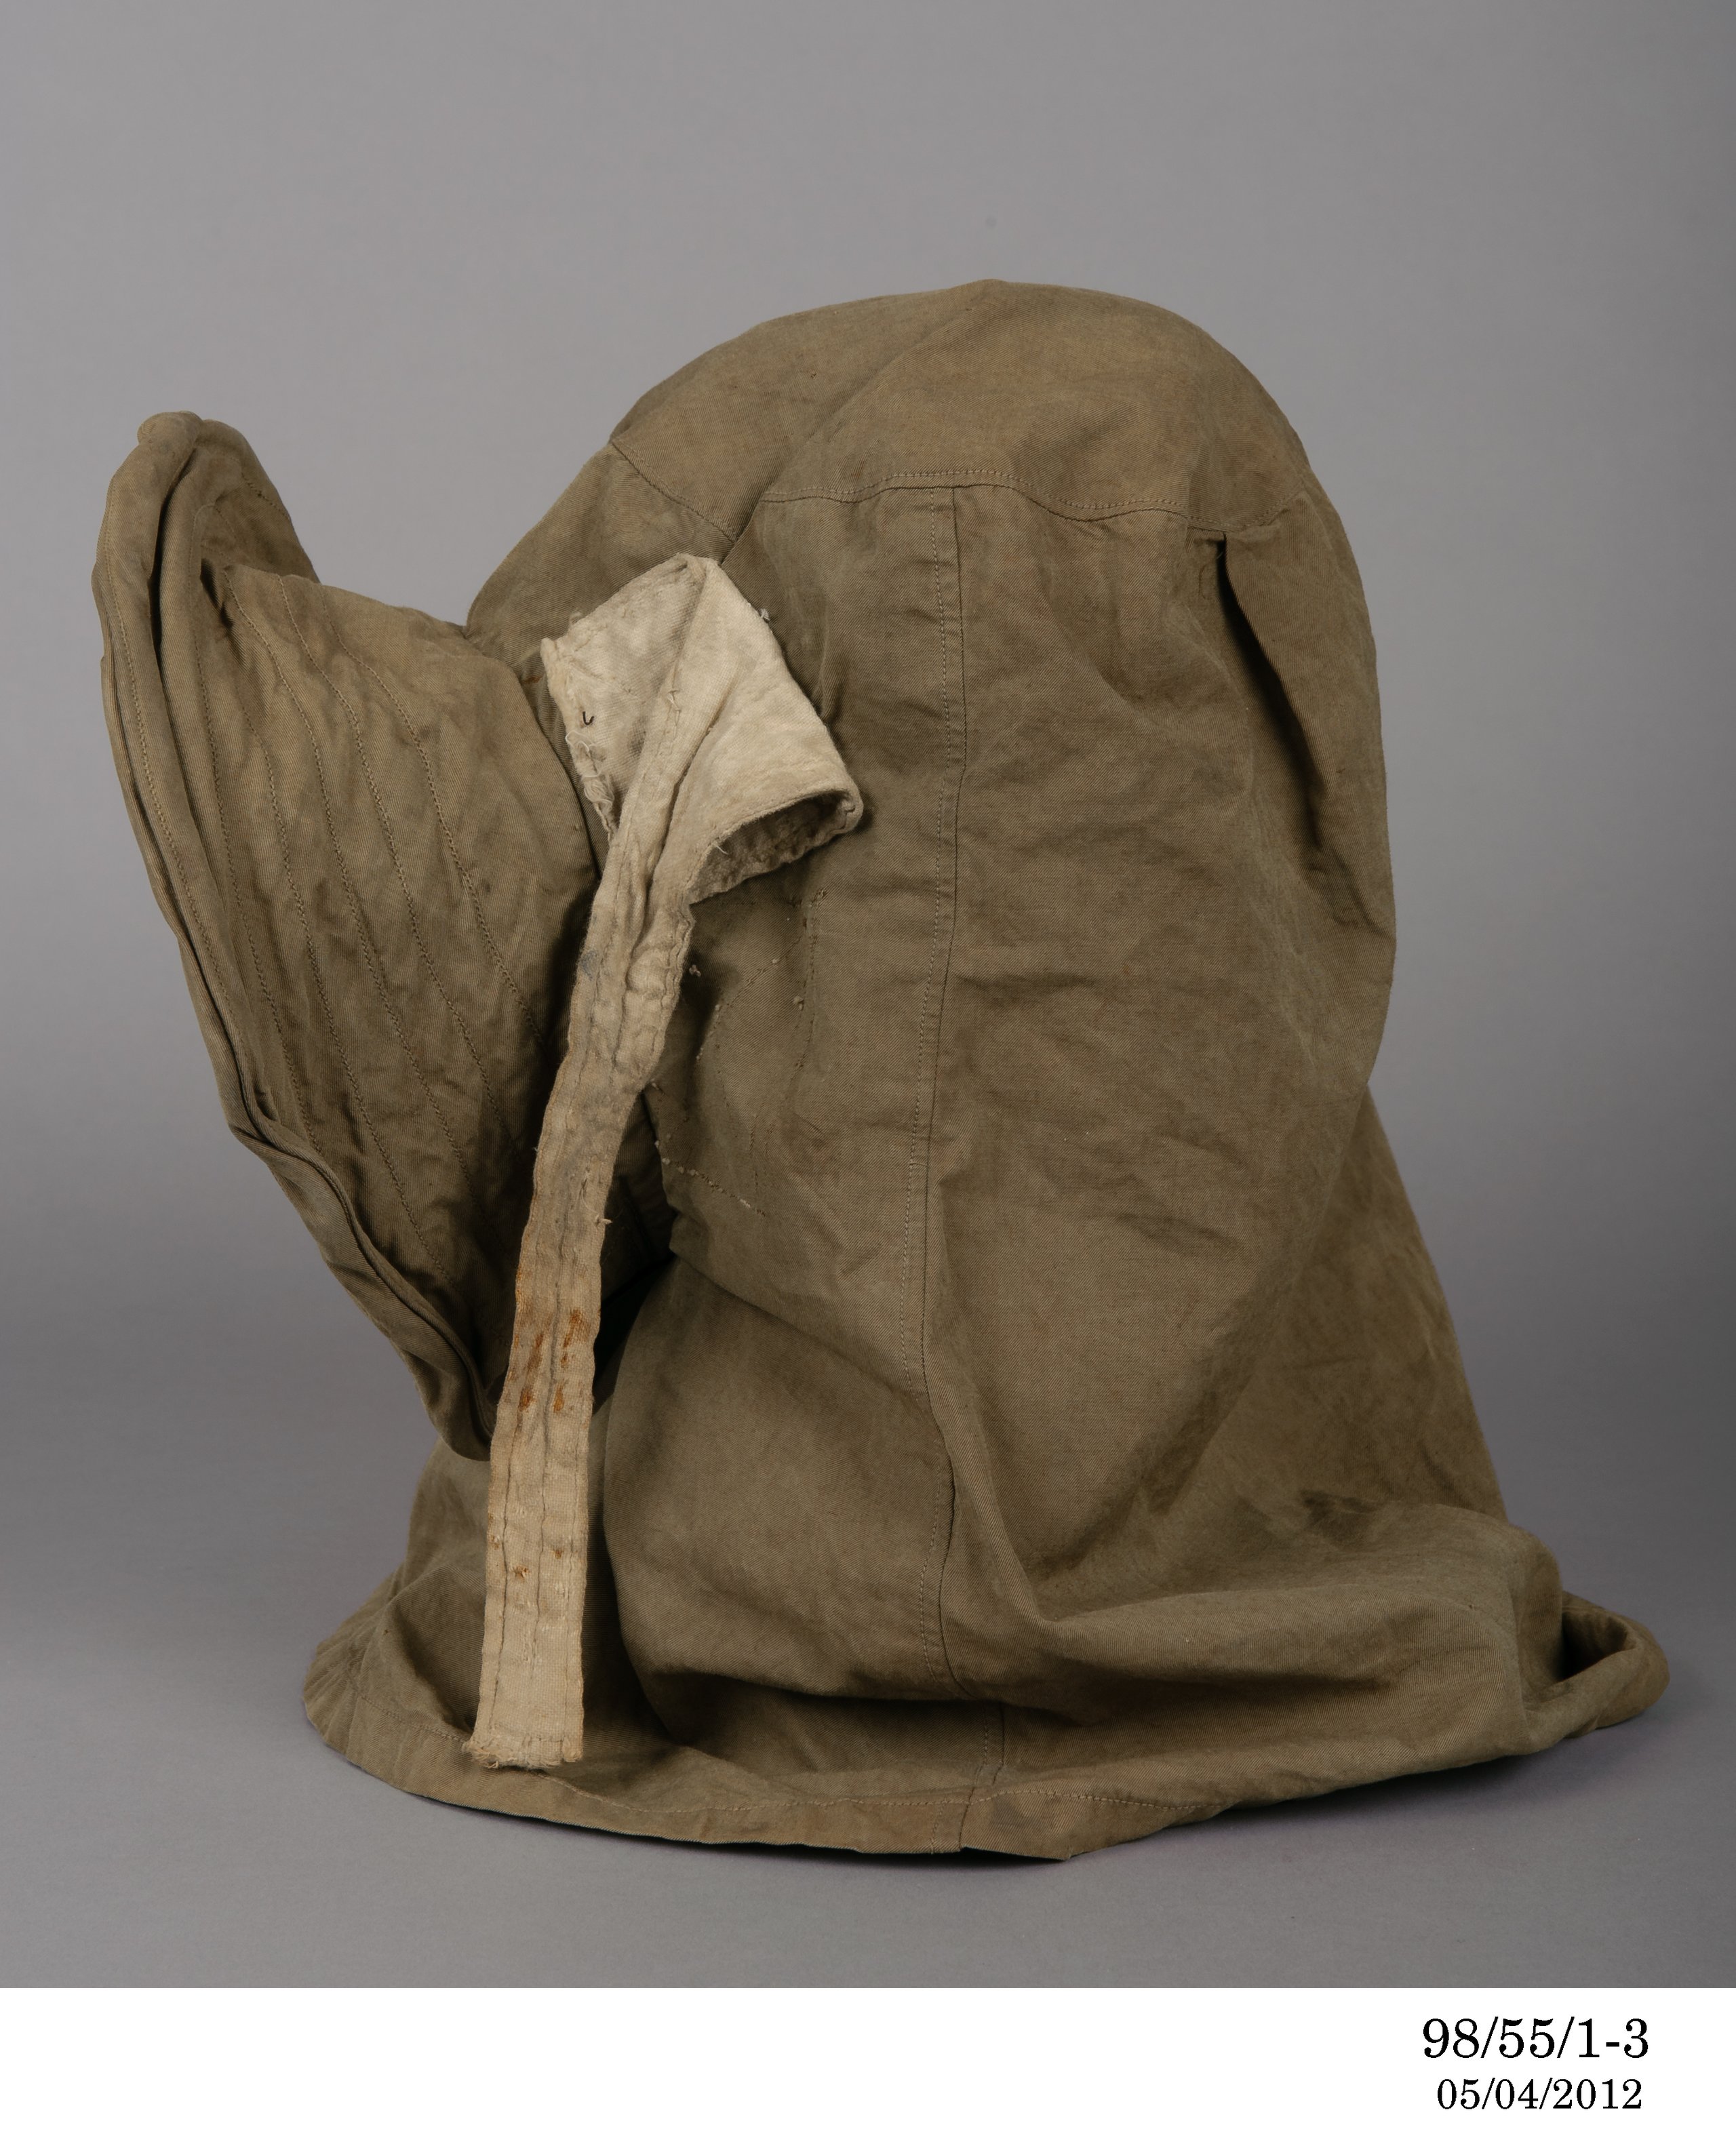 Protective work clothing used by Charles Francis Laseron